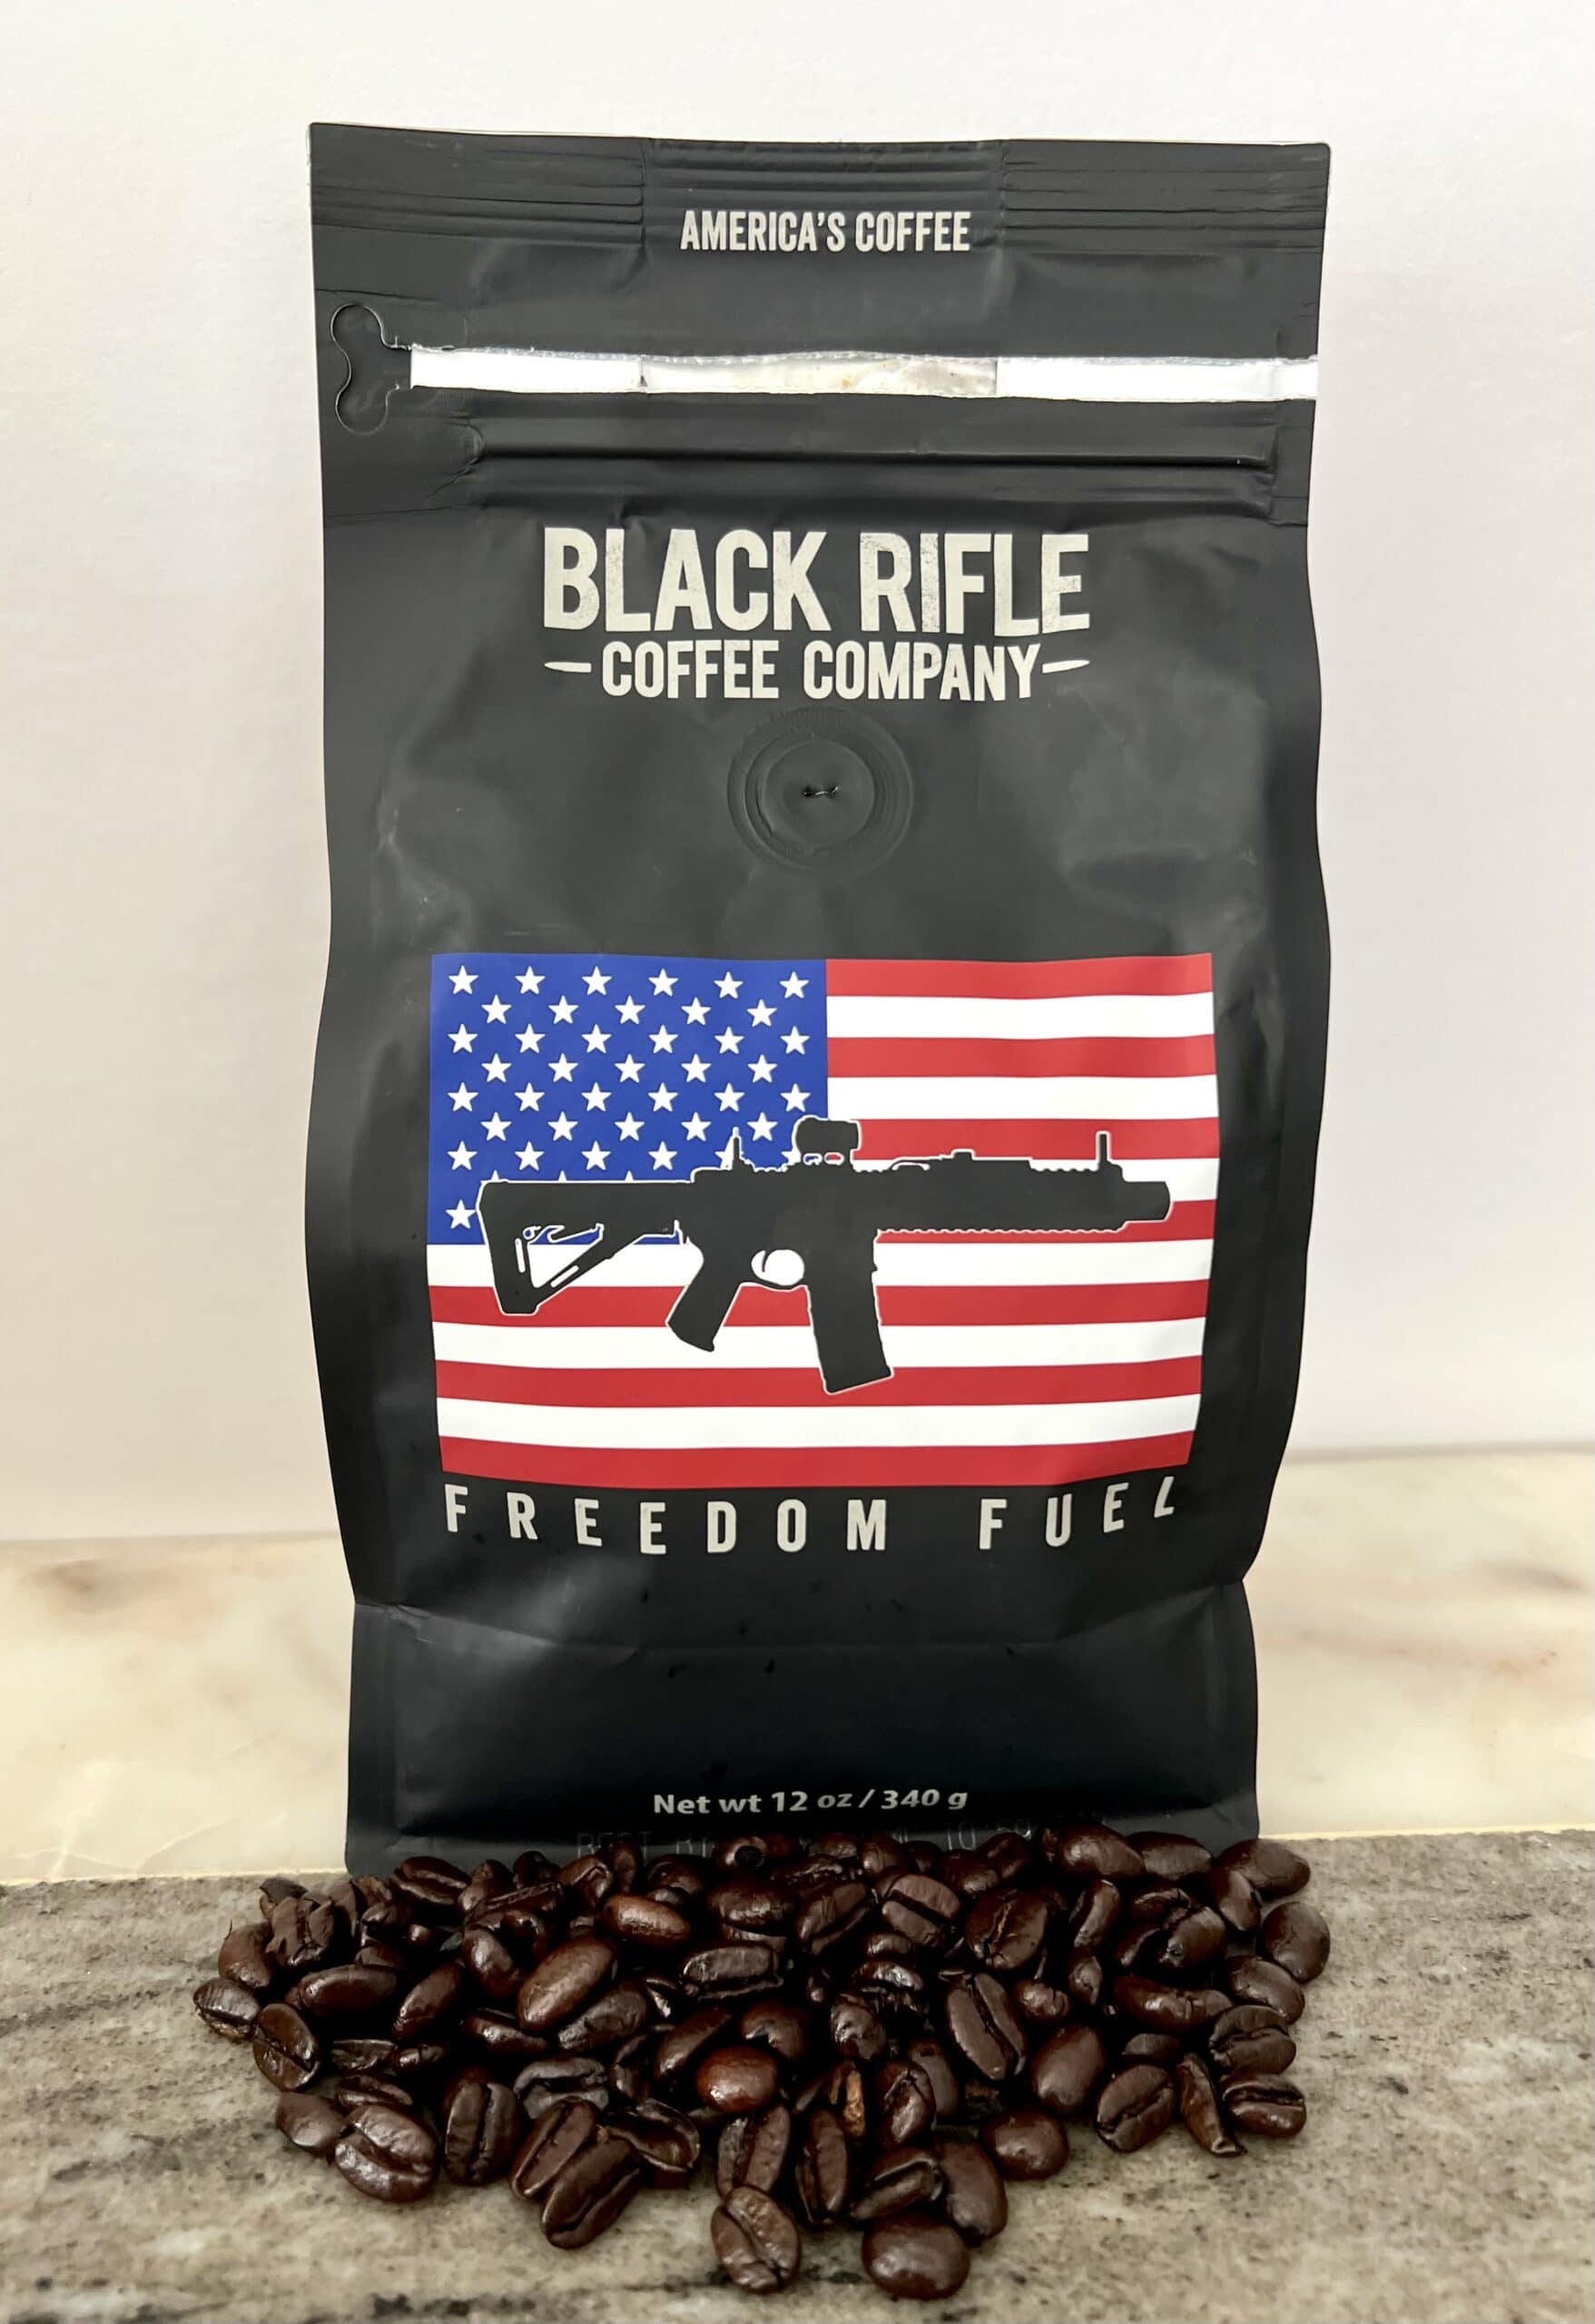 Freedom Fuel - Black Rifle Coffee near scattered coffee beans